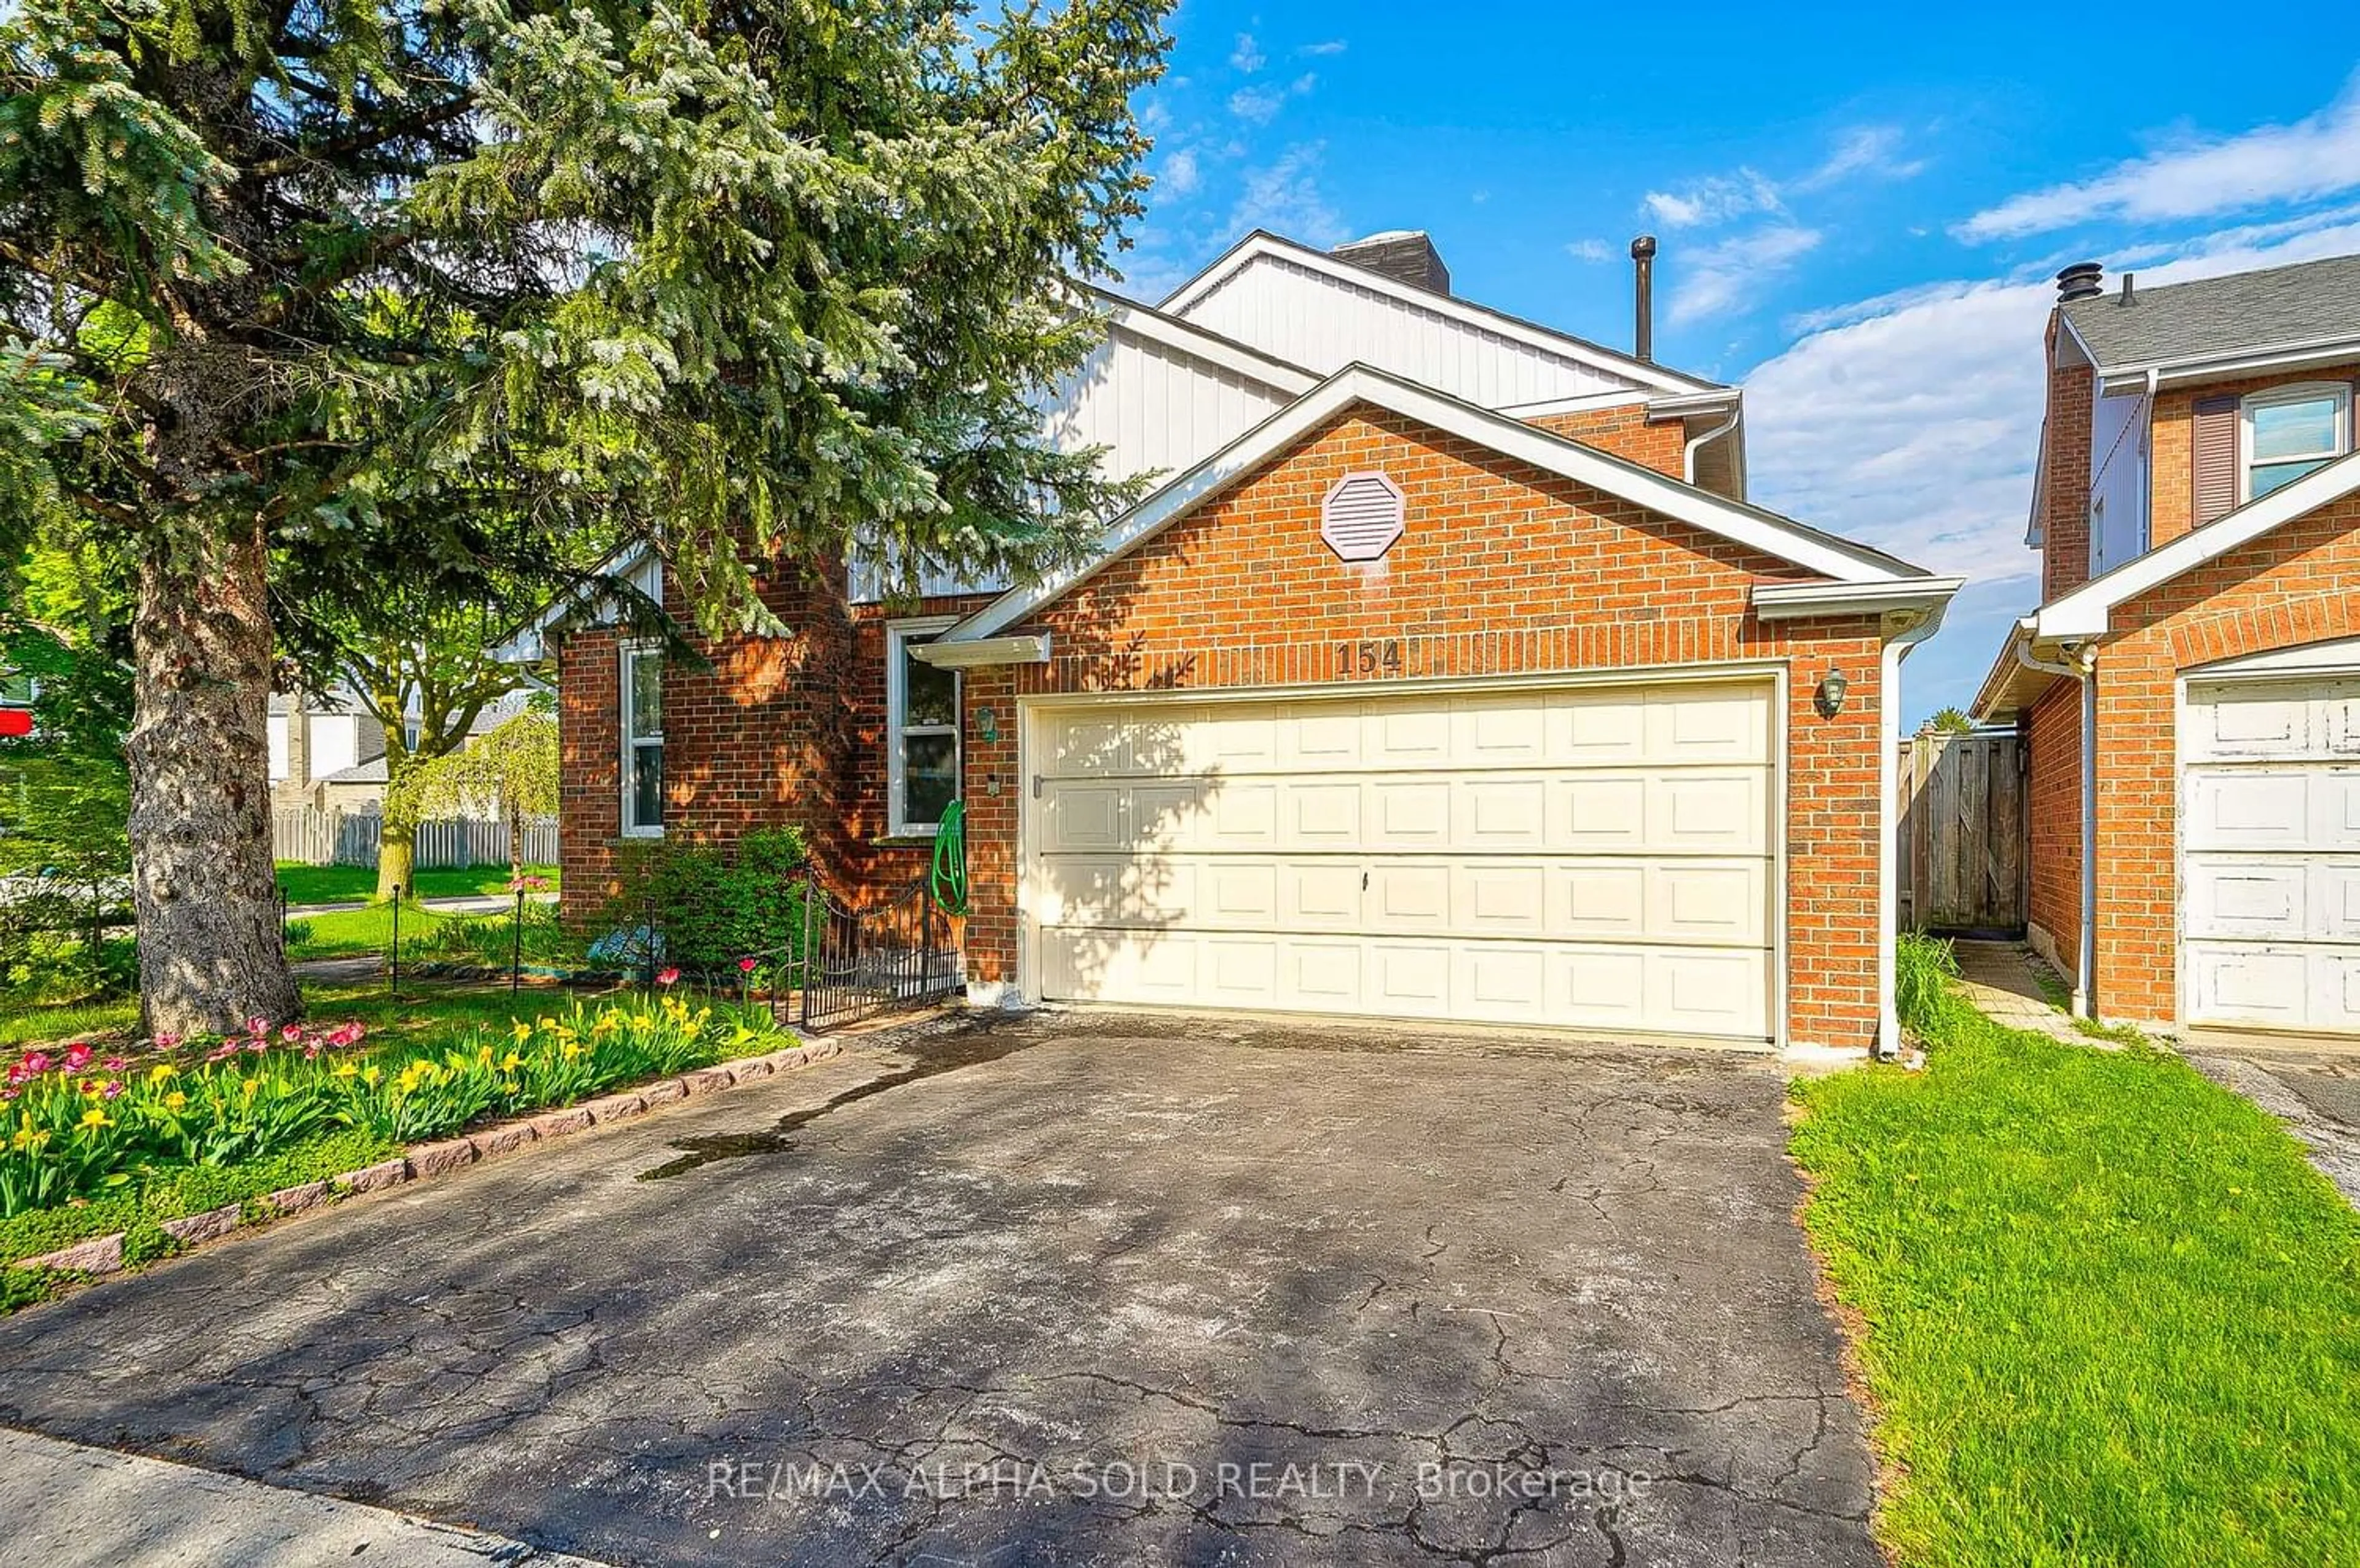 Home with brick exterior material for 154 Wintermute Blvd, Toronto Ontario M1W 3N9